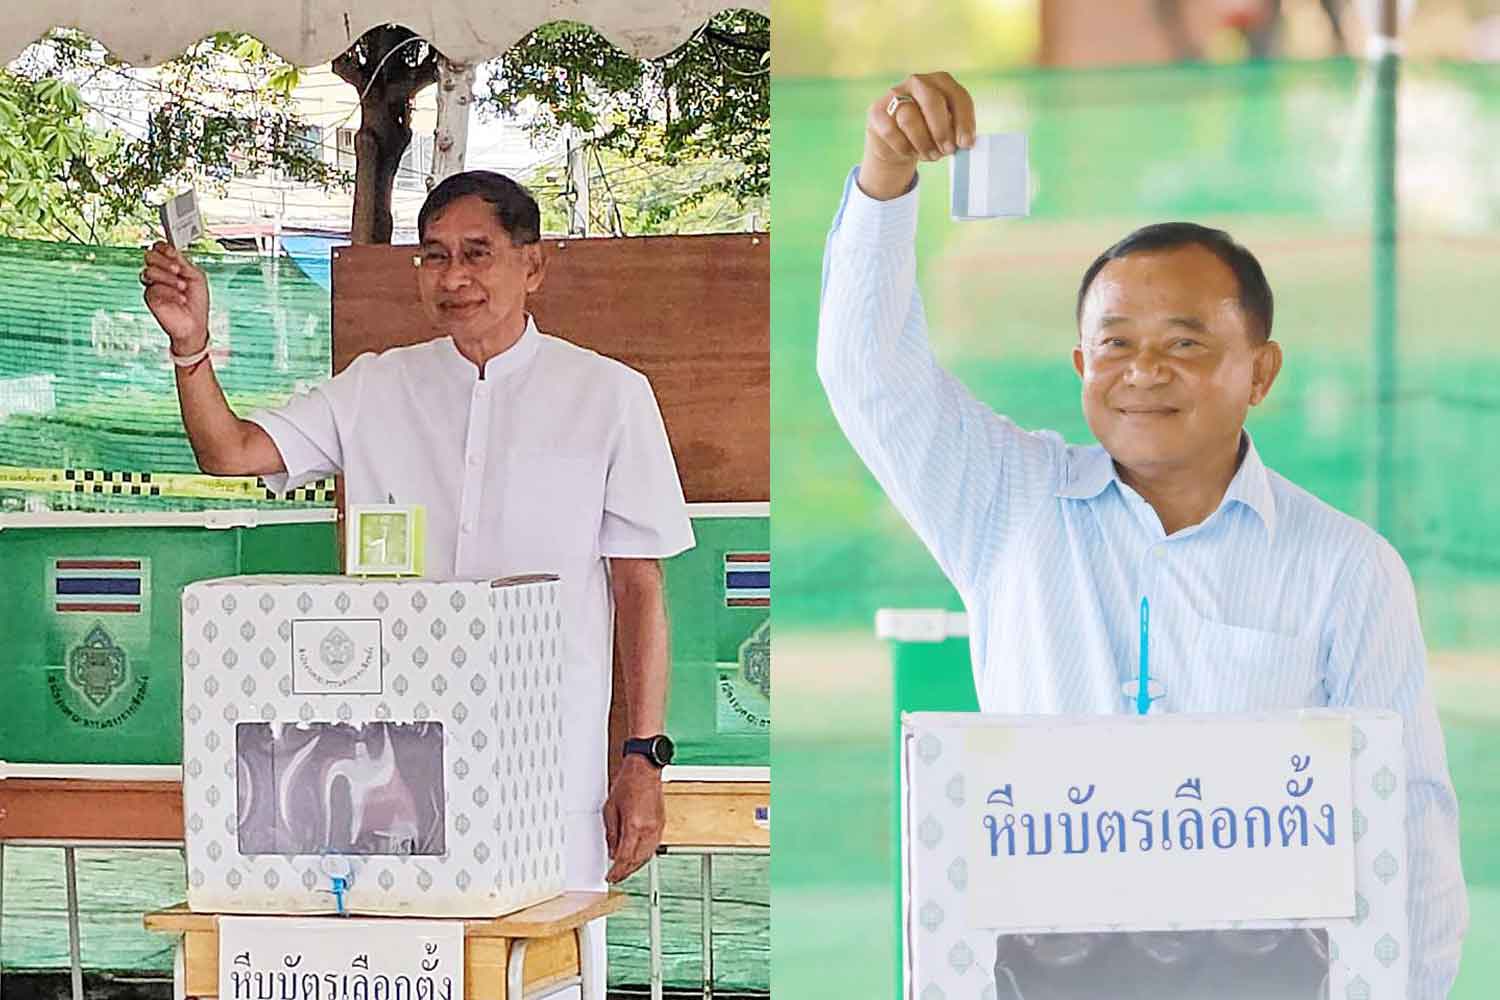 Pol Lt Gen Kamronwit Toopkrajang, left, and Chan Puangpetch cast their vote in the provincial administrative election in Pathum Thani on Sunday. (Photos: Pongpat Wongyala)